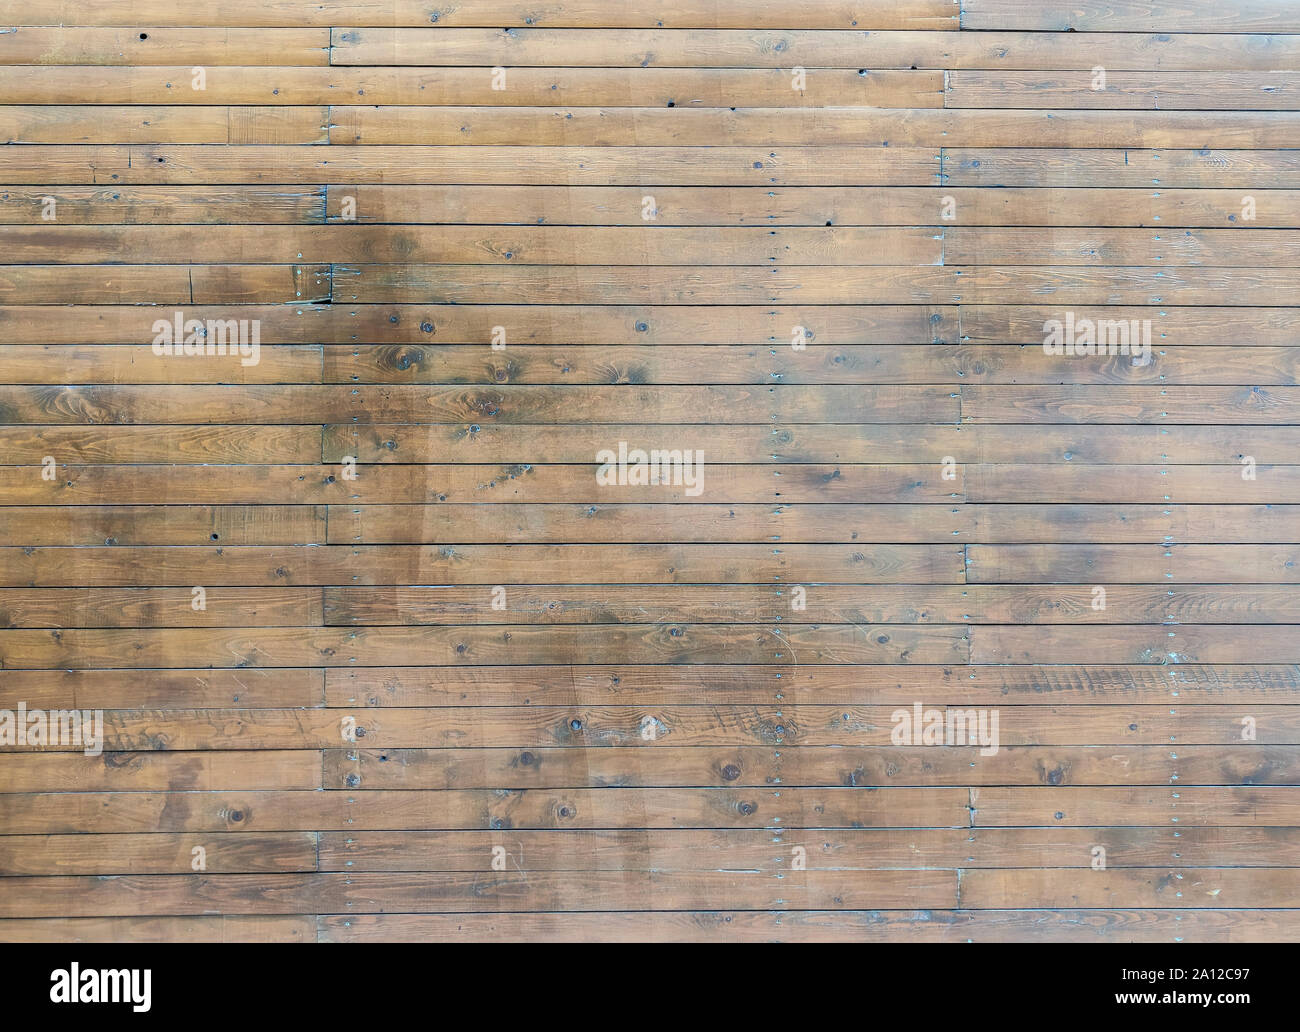 Wood background, texture. Wooden planks, board for floor or wall material Stock Photo